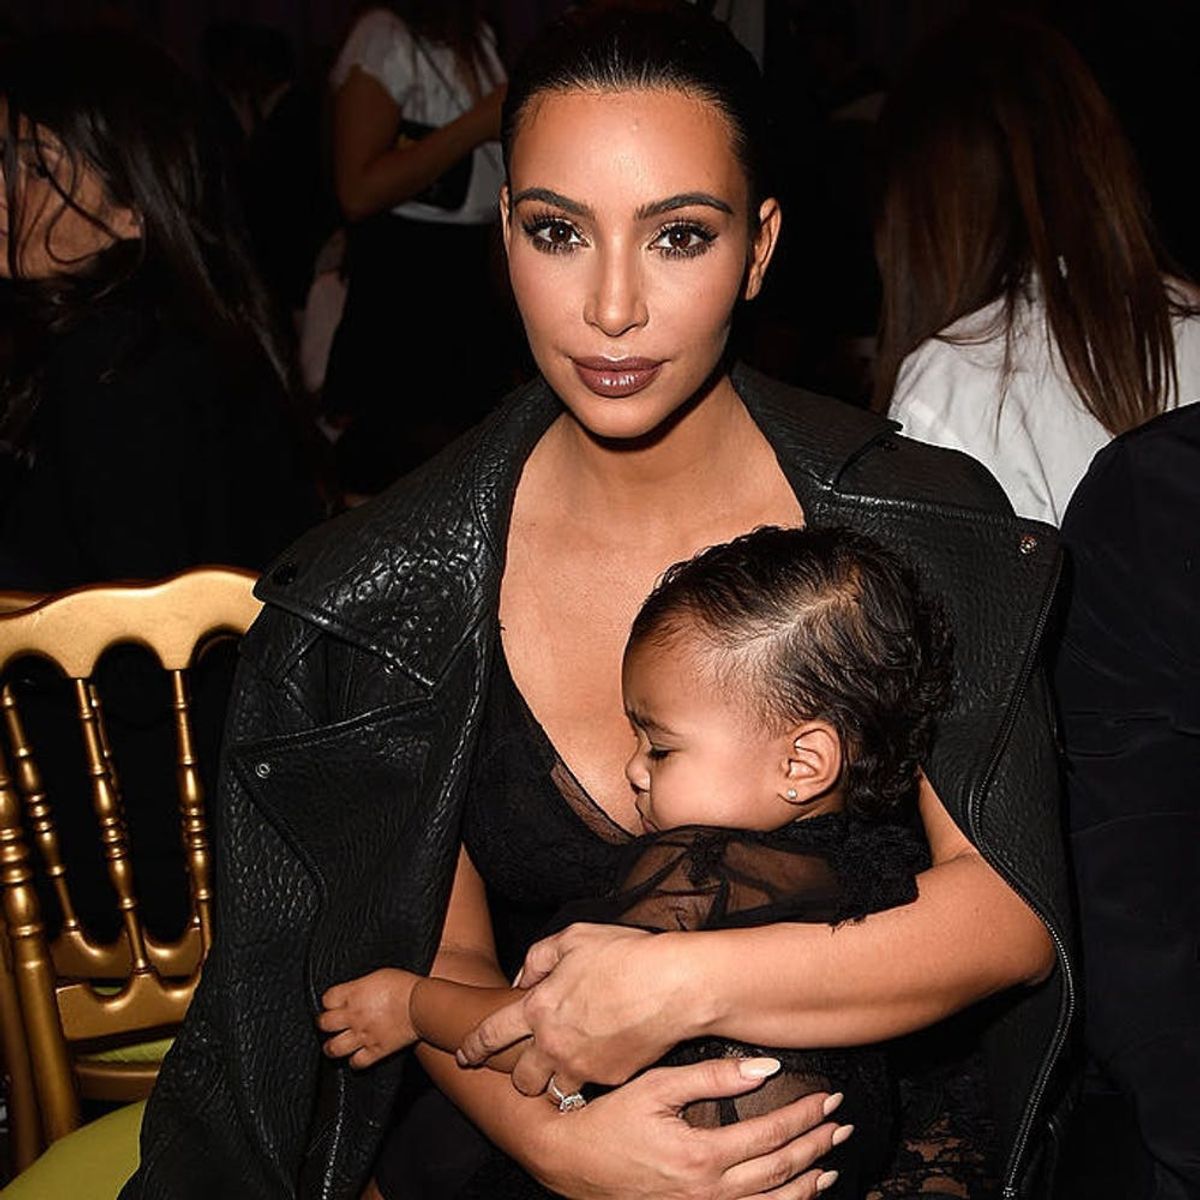 Kim Kardashian Is Dealing With Some Difficult Baby News